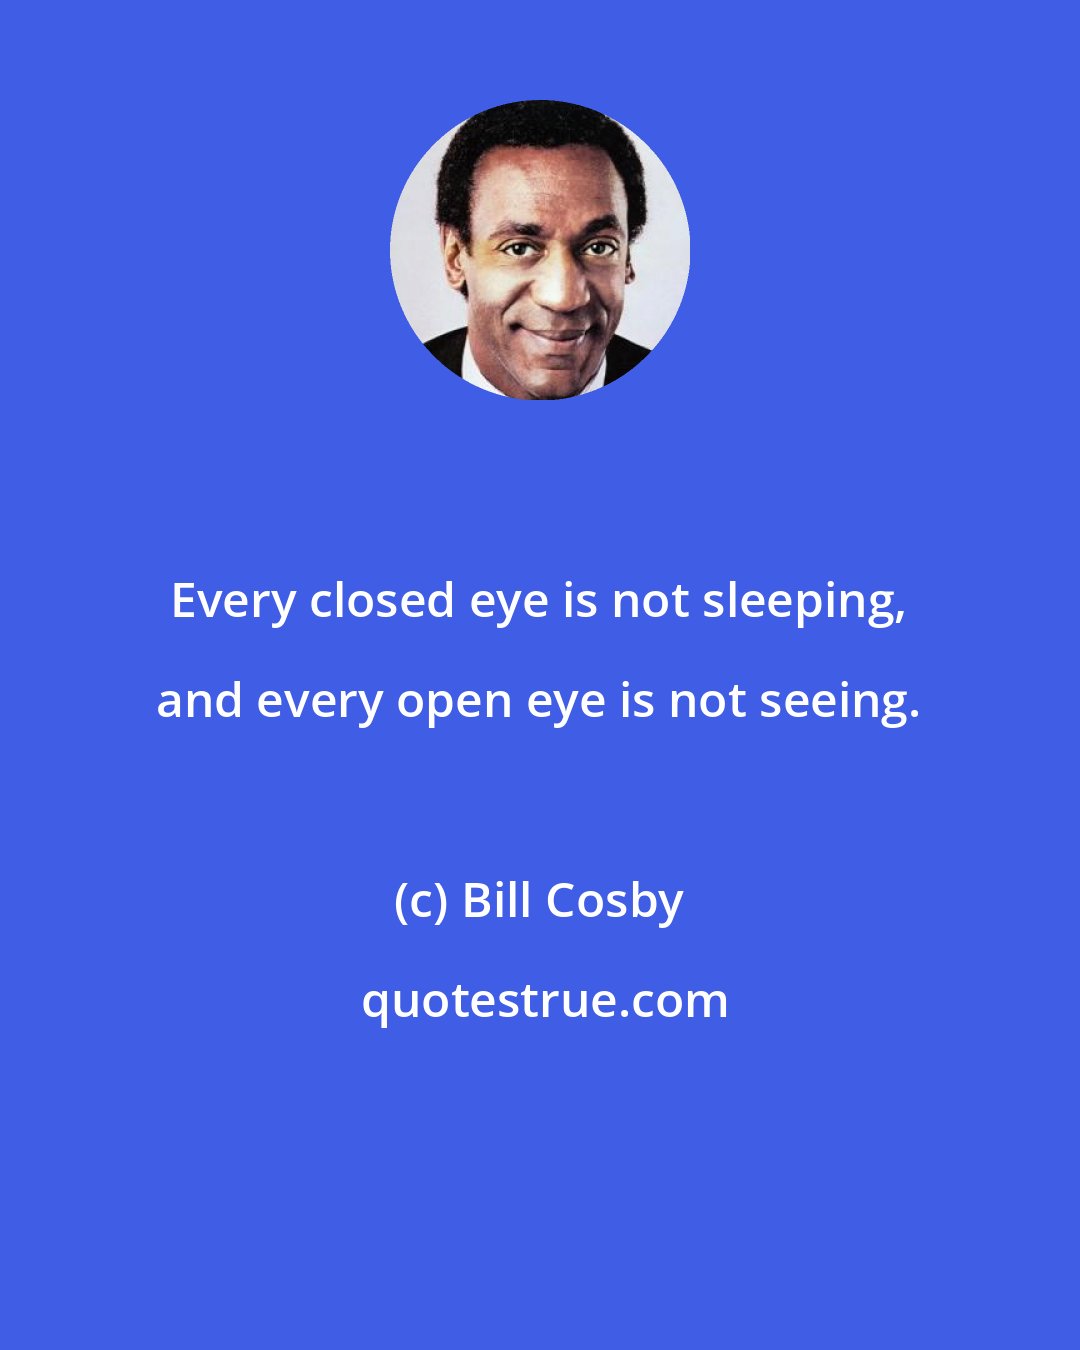 Bill Cosby: Every closed eye is not sleeping, and every open eye is not seeing.